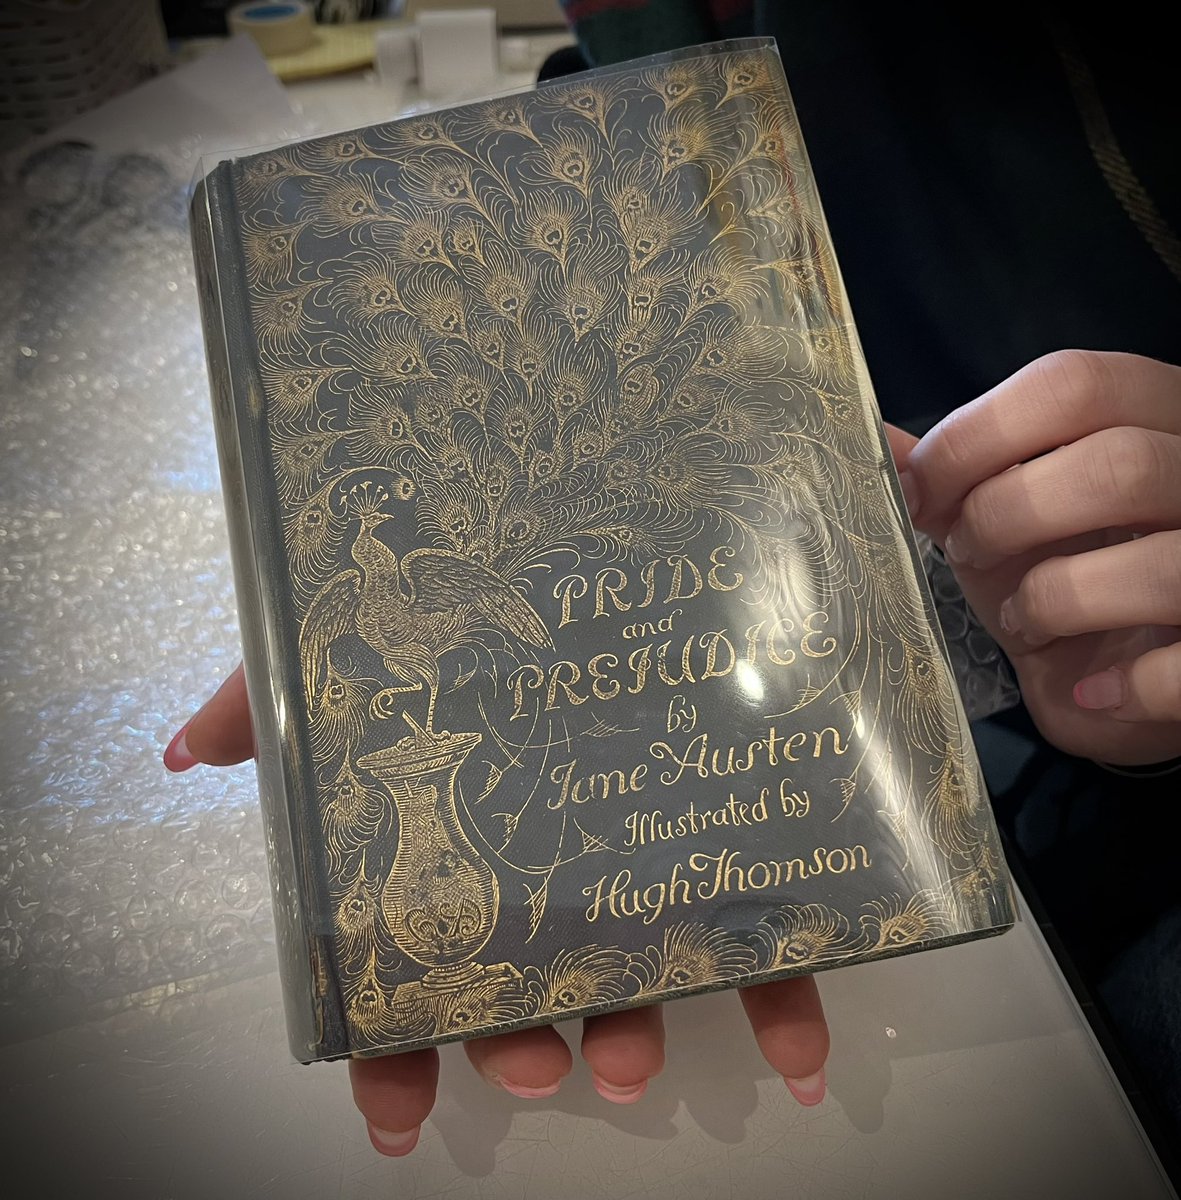 Went book shopping today; the shop had acquired this one hour before I came in & it was already sold, but the new owner let me have a peek. 🦚
#PrideandPrejudice
#JaneAusten